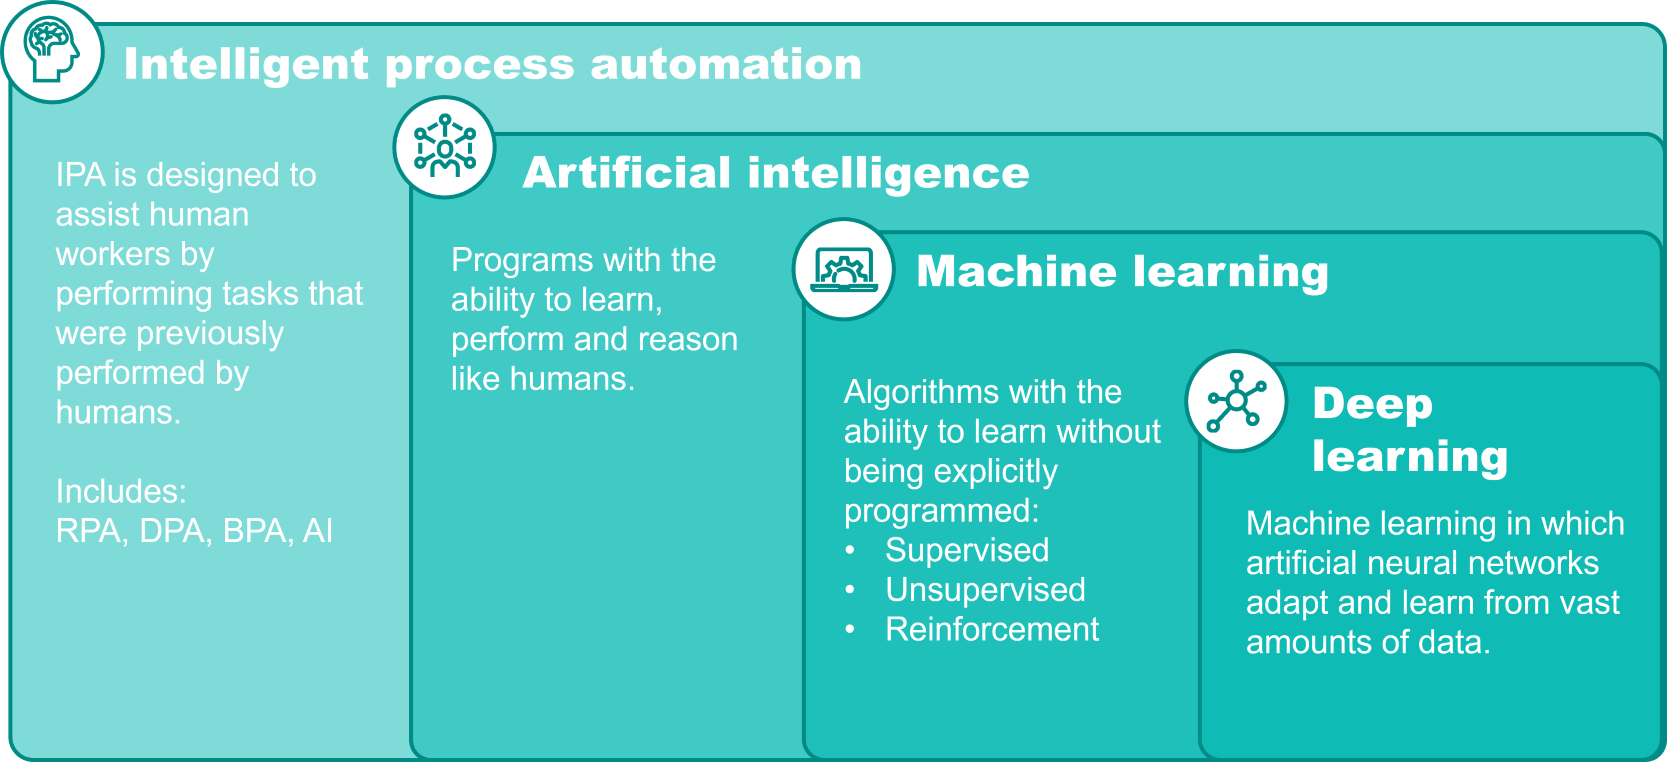 Intelligent process automation (IPA), machine learning (ML) and deep learning are all part of the artificial intelligence (AI) technology landscape